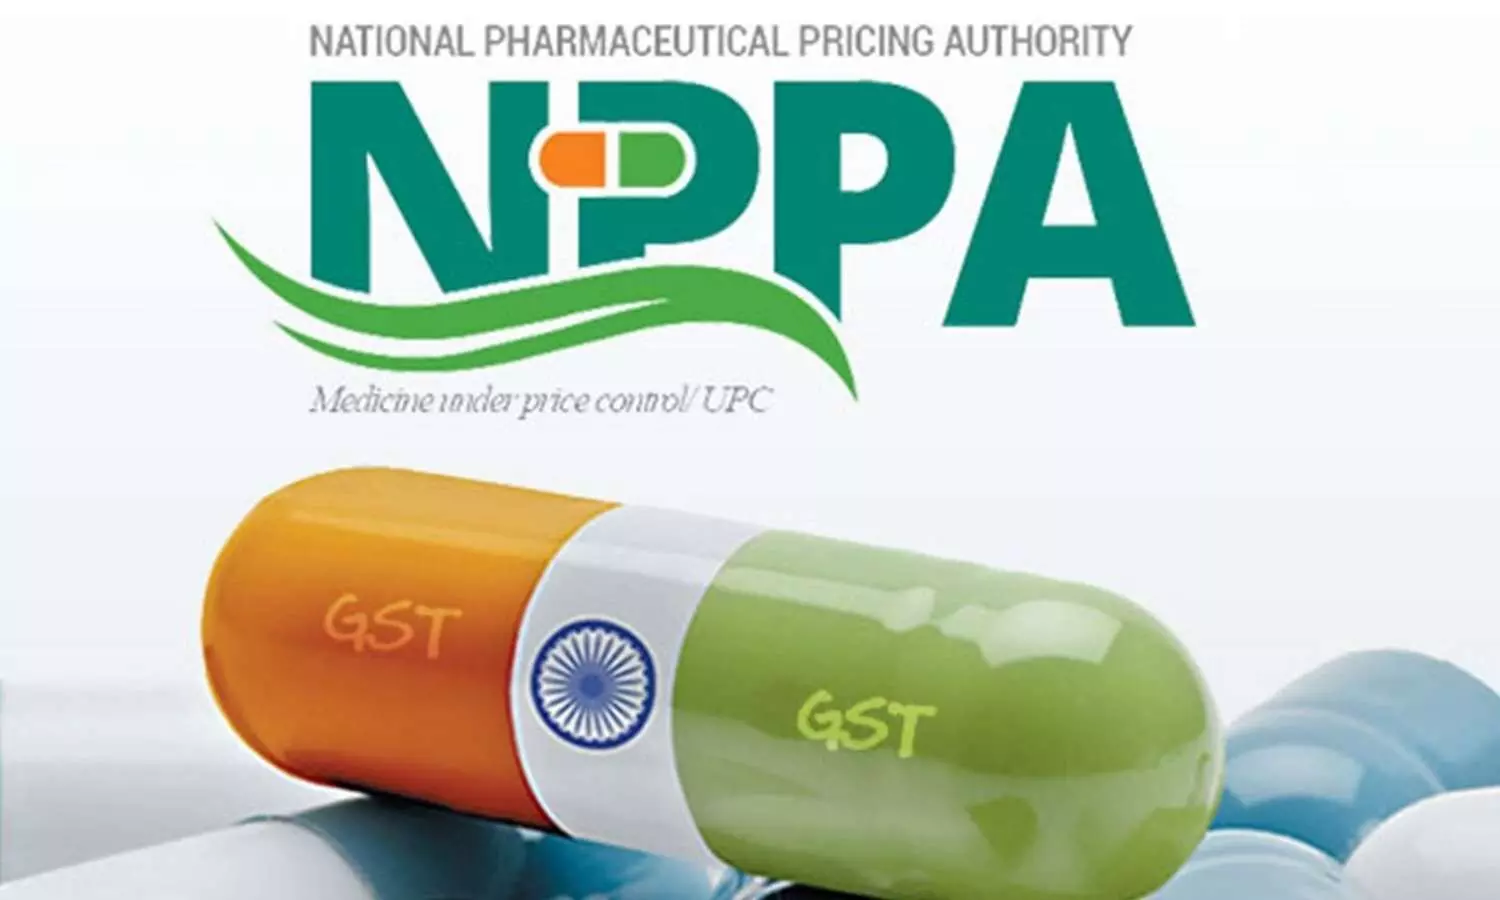 Furnish Price to Retailer and Moving Annual Turnover value in respect of 11 Formulations: NPPA